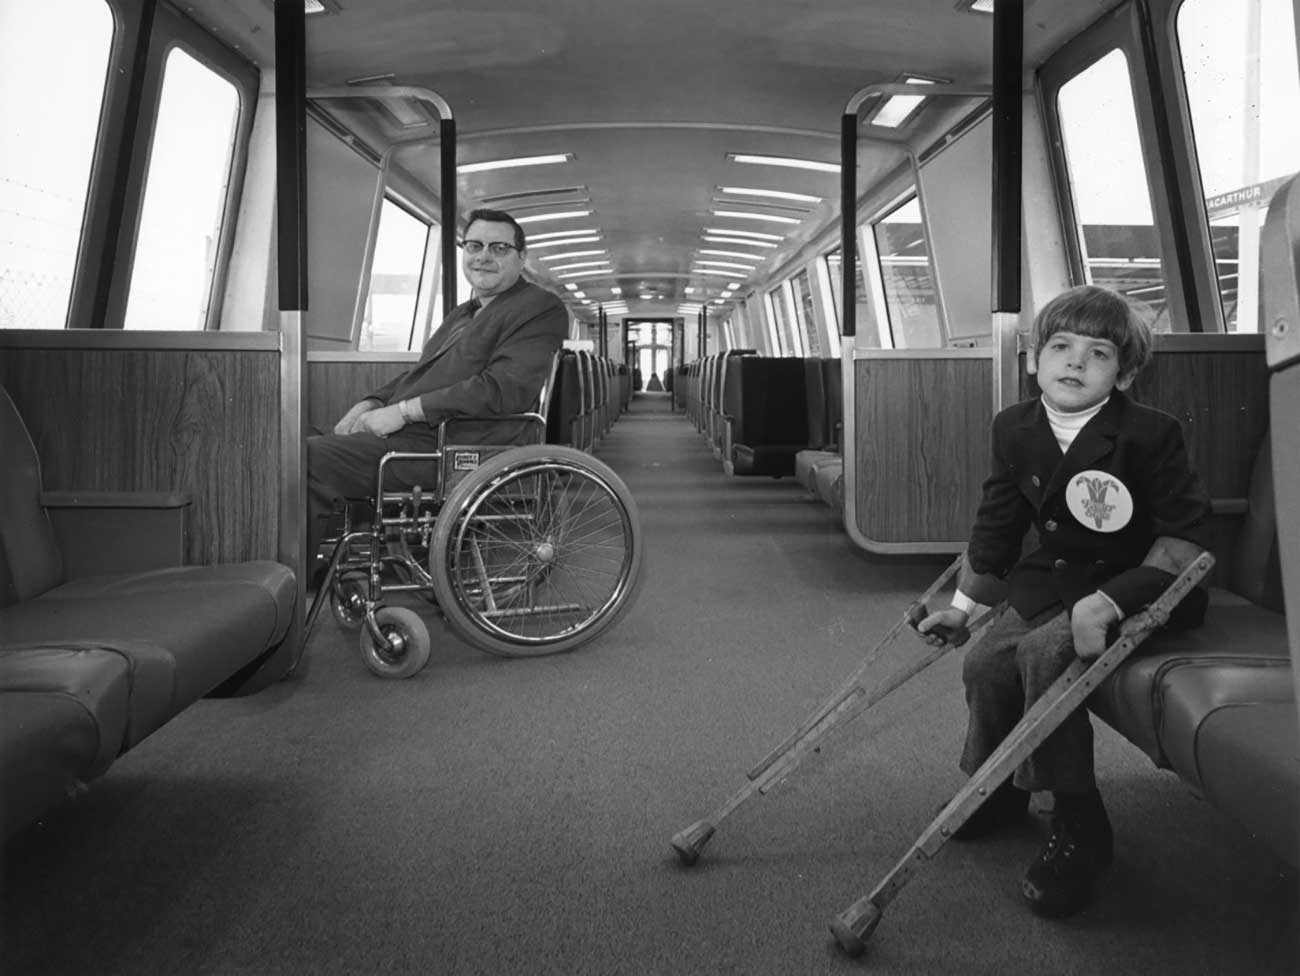 A young boy on crutches and man in a wheelchair on a BART train.